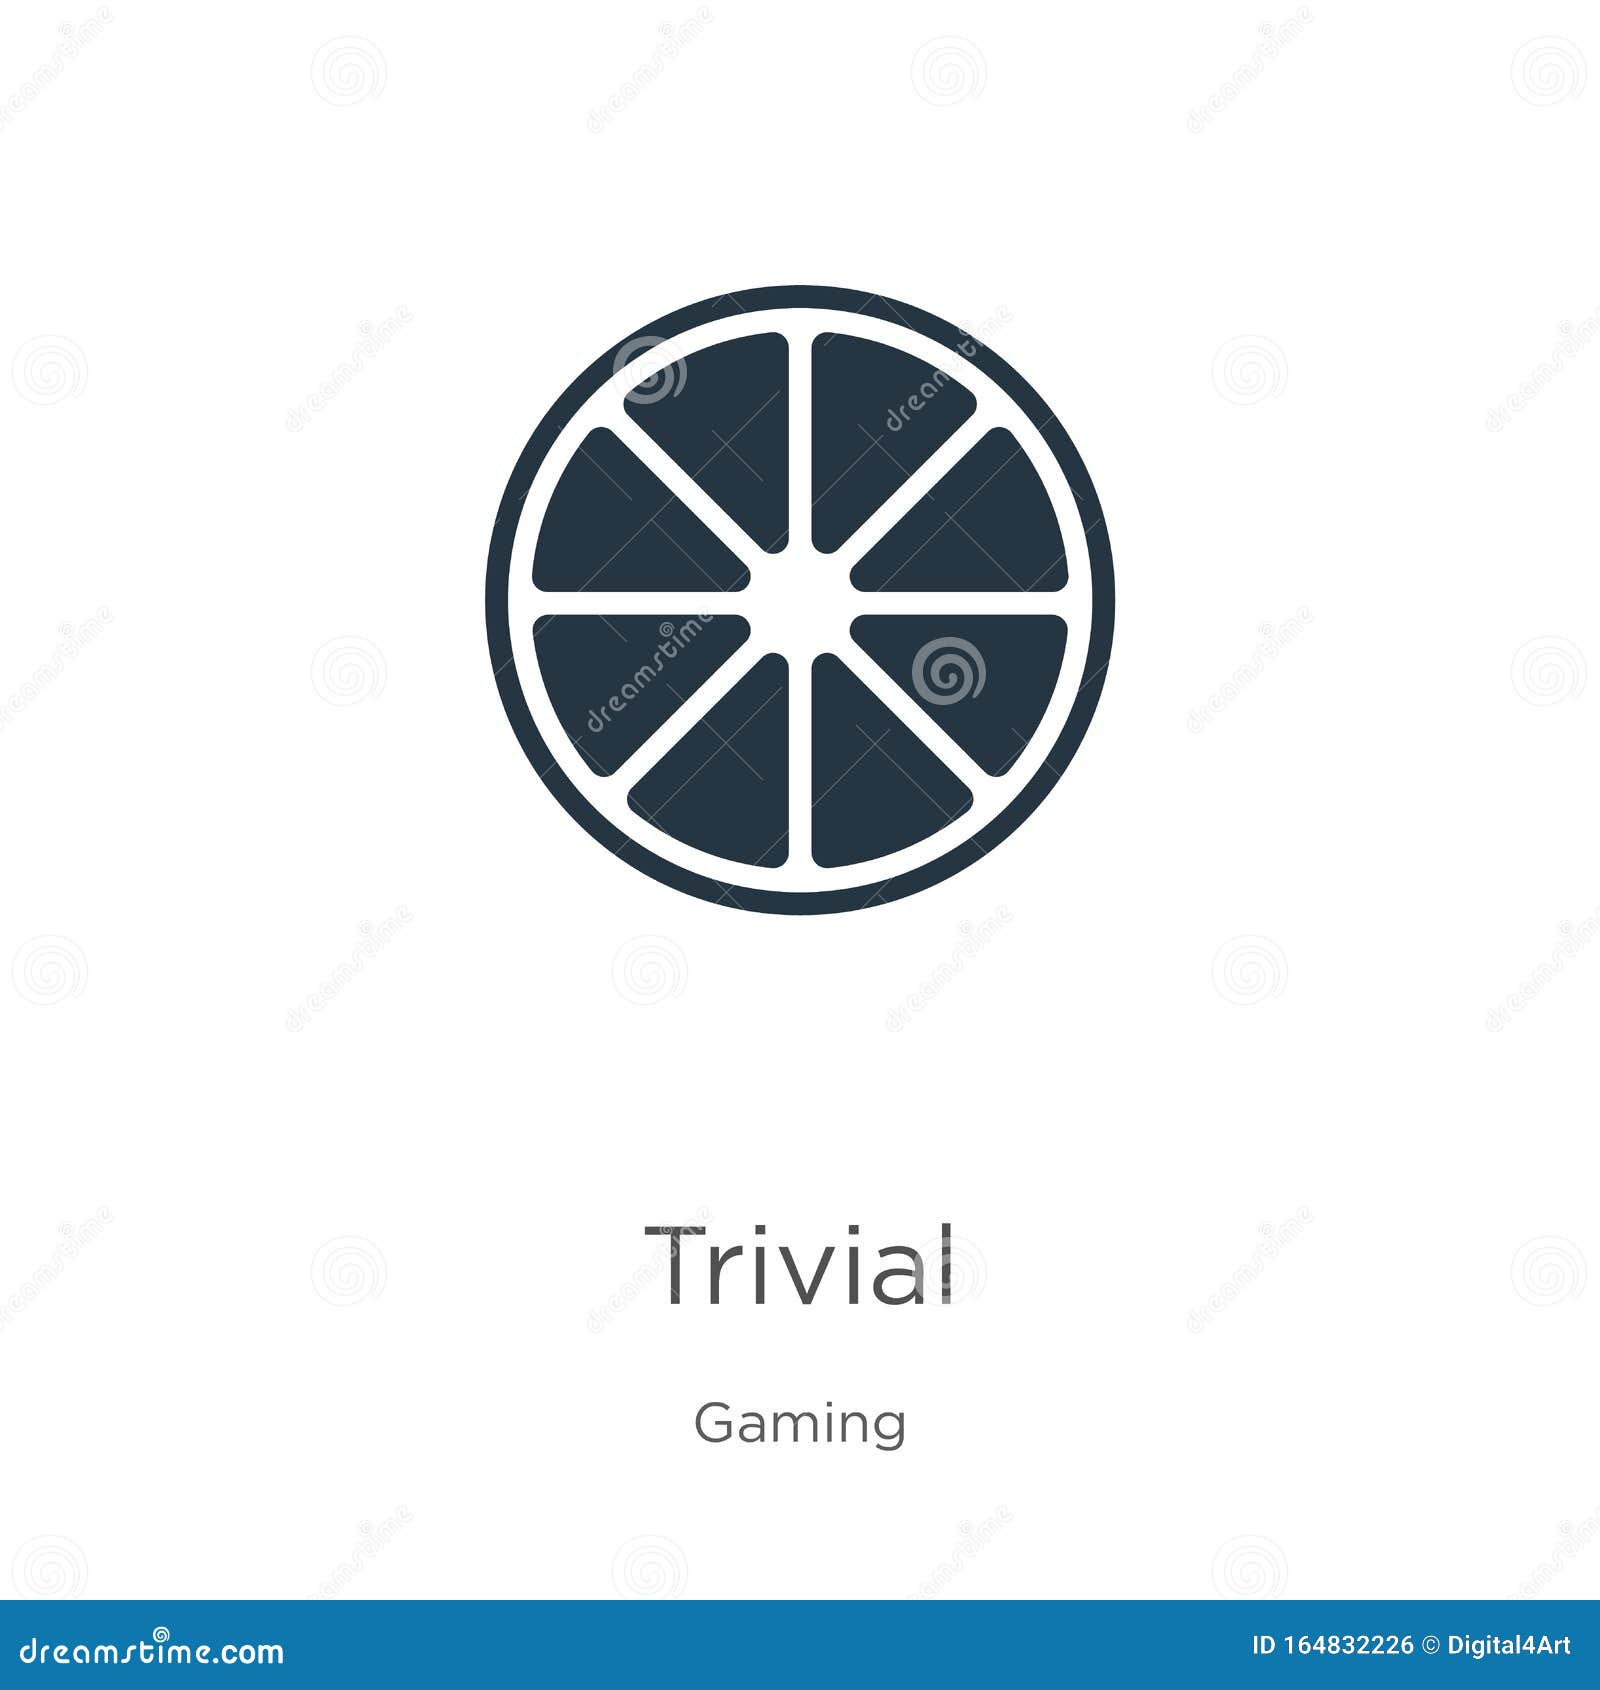 trivial icon . trendy flat trivial icon from gaming collection  on white background.   can be used